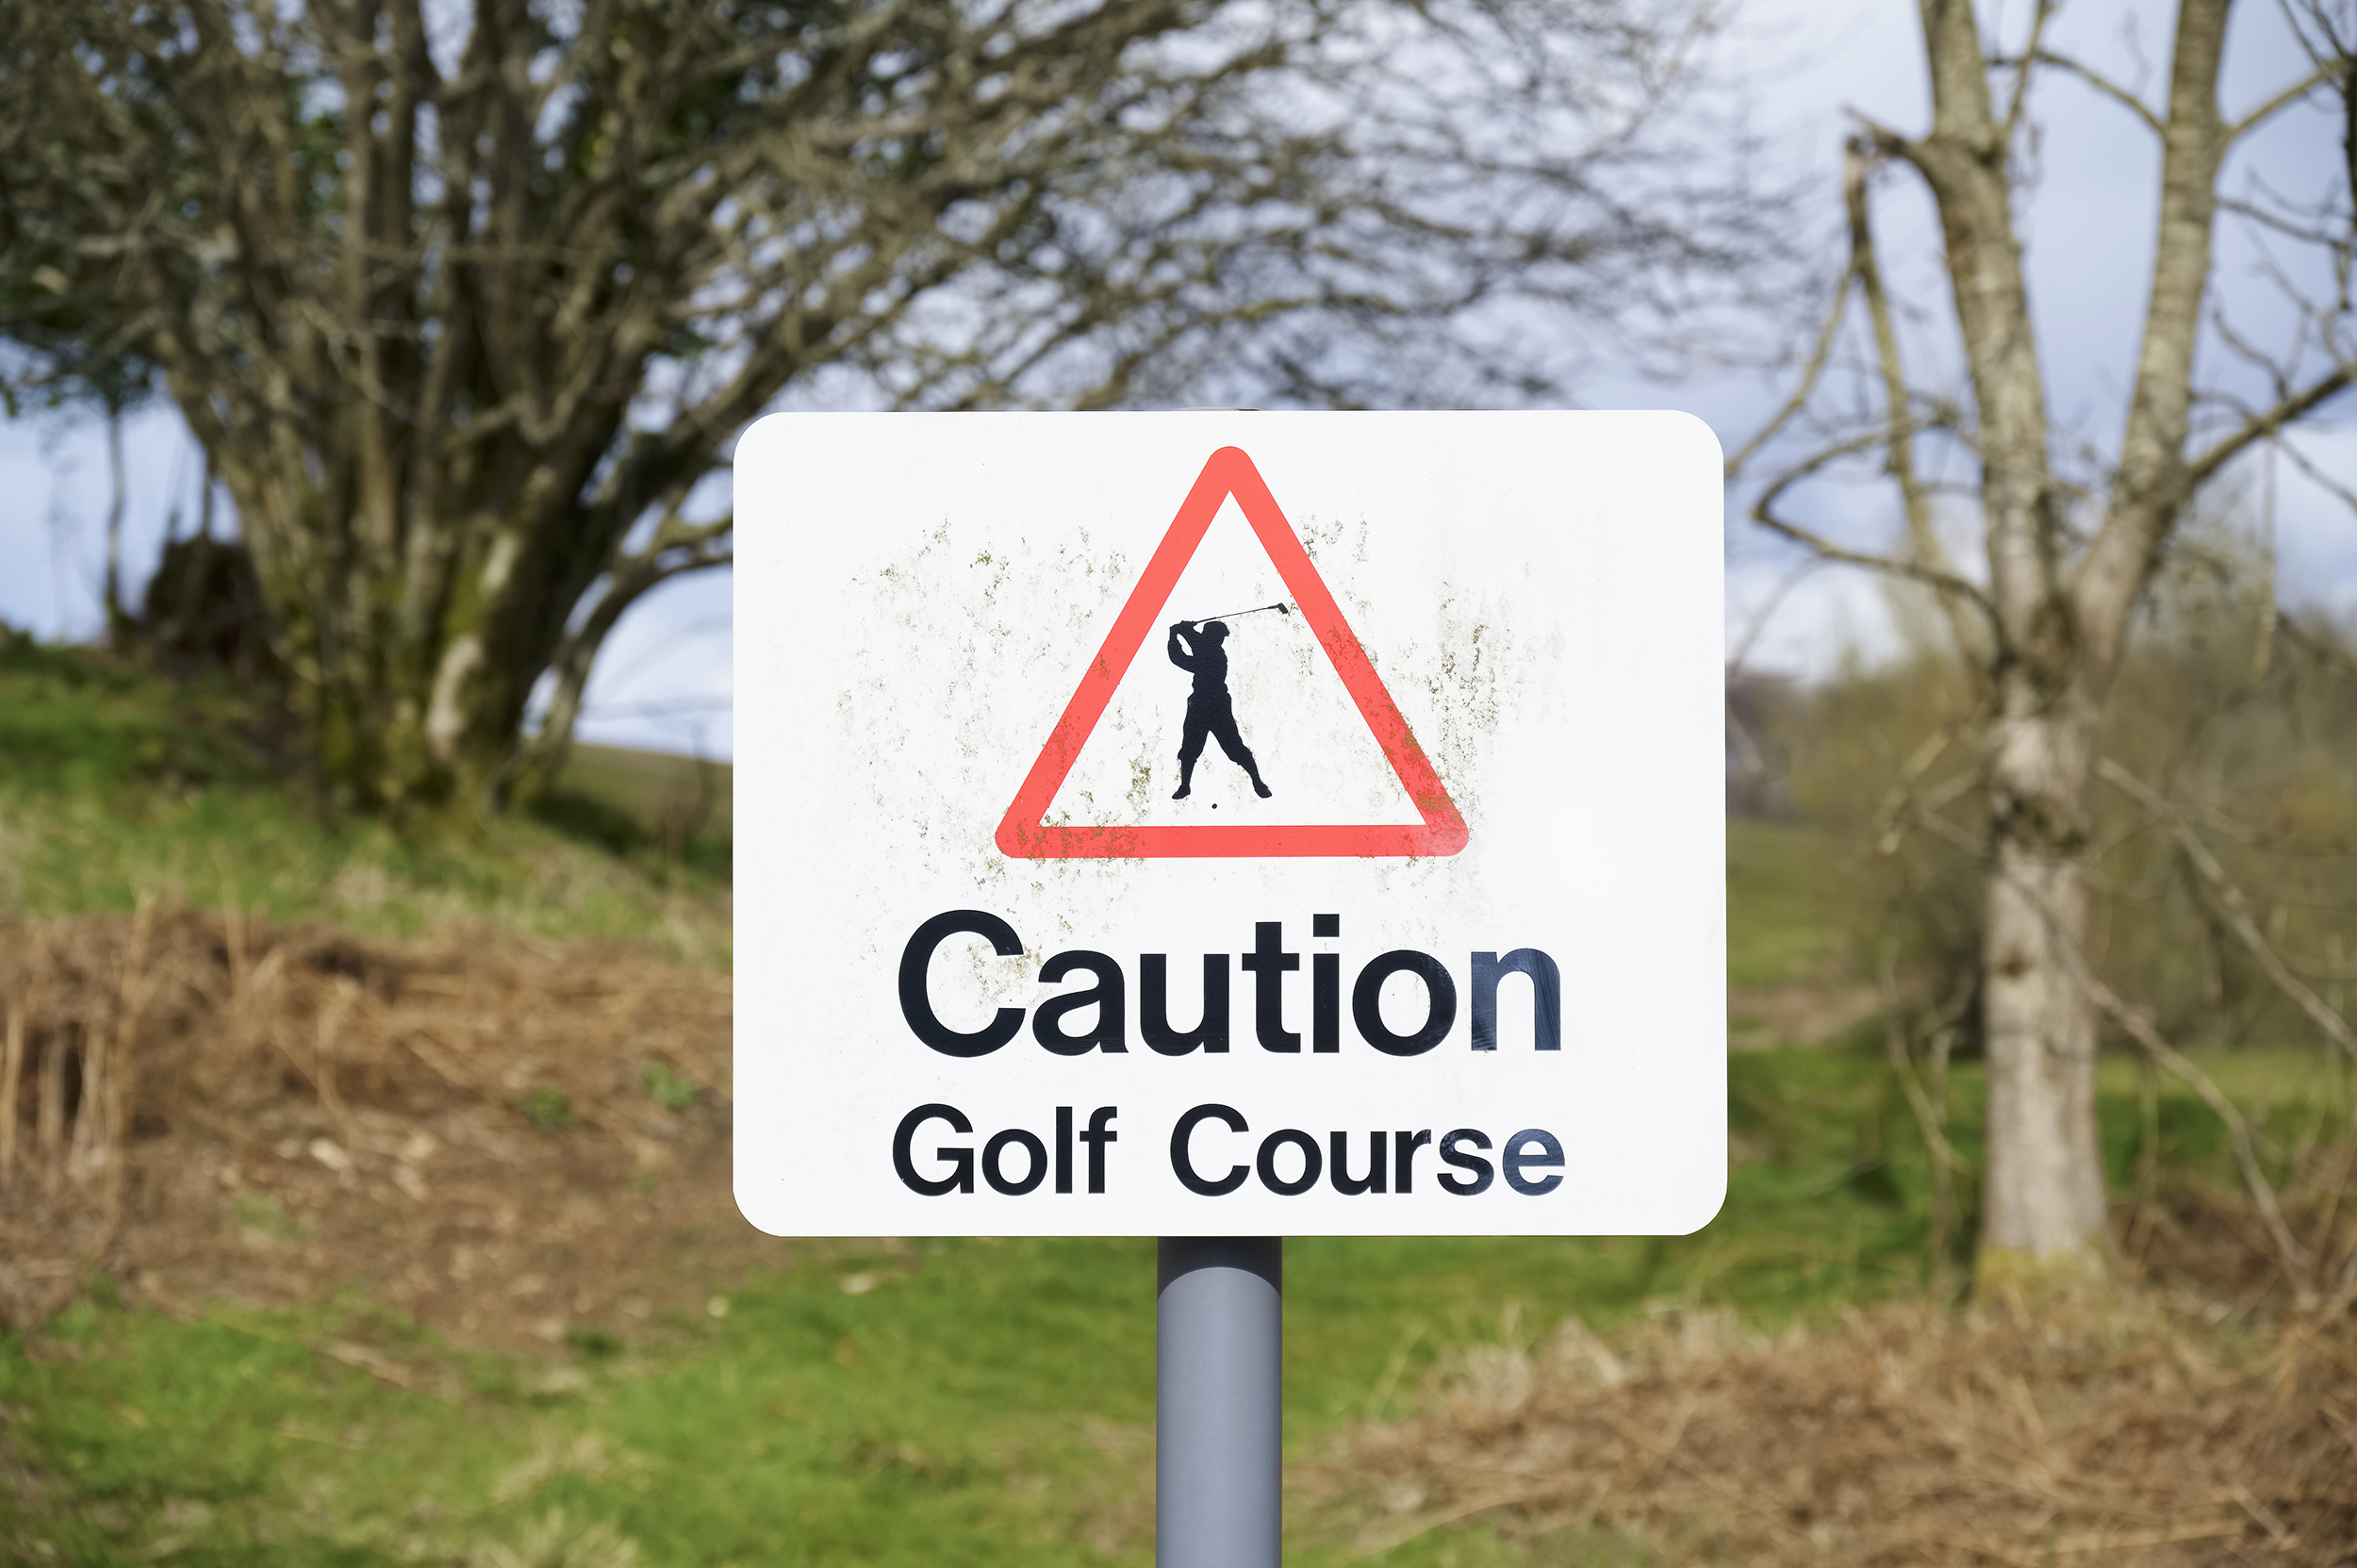 Beware of Golf Balls Sign from golf course near home